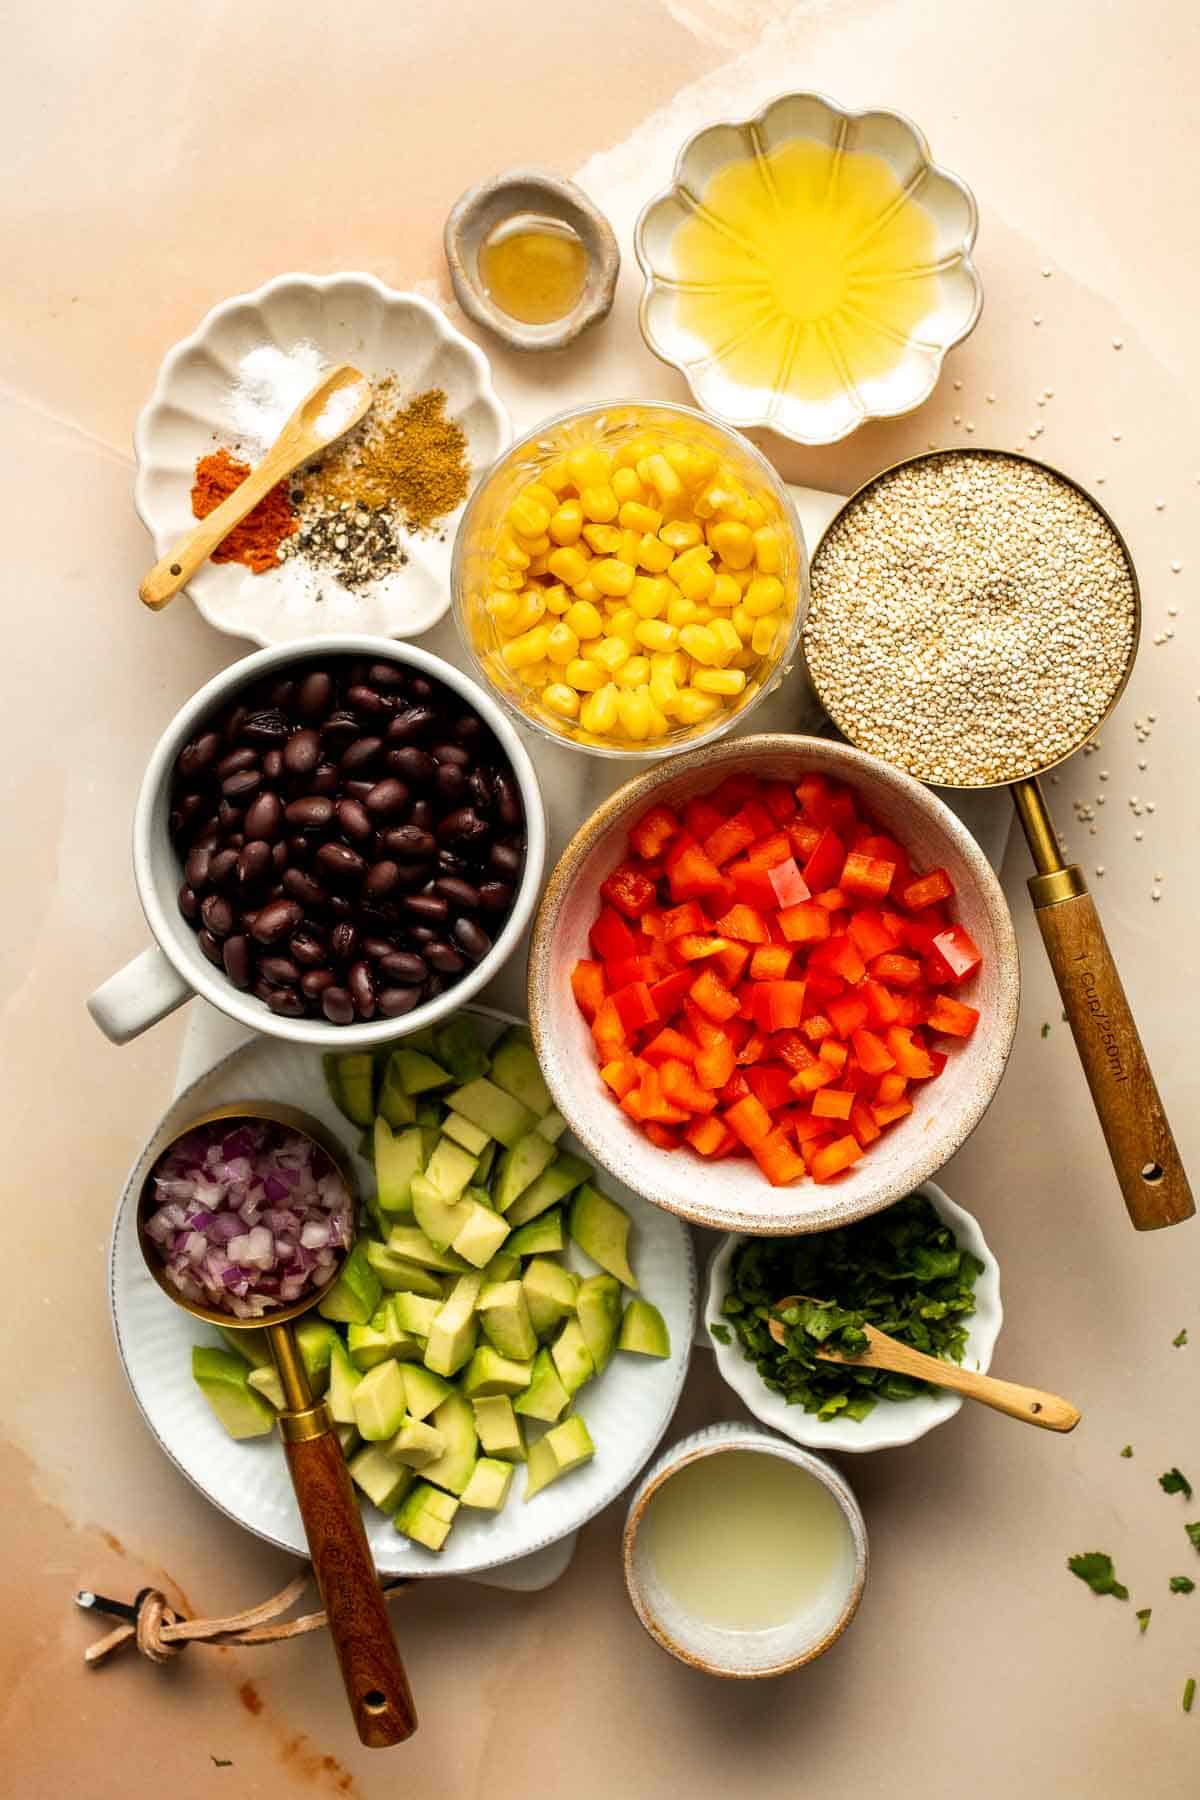 Southwest Quinoa Salad is hearty, flavorful, and delicious. It's loaded with chunky vegetables and tender quinoa, coated in a tangy homemade dressing. | aheadofthyme.com